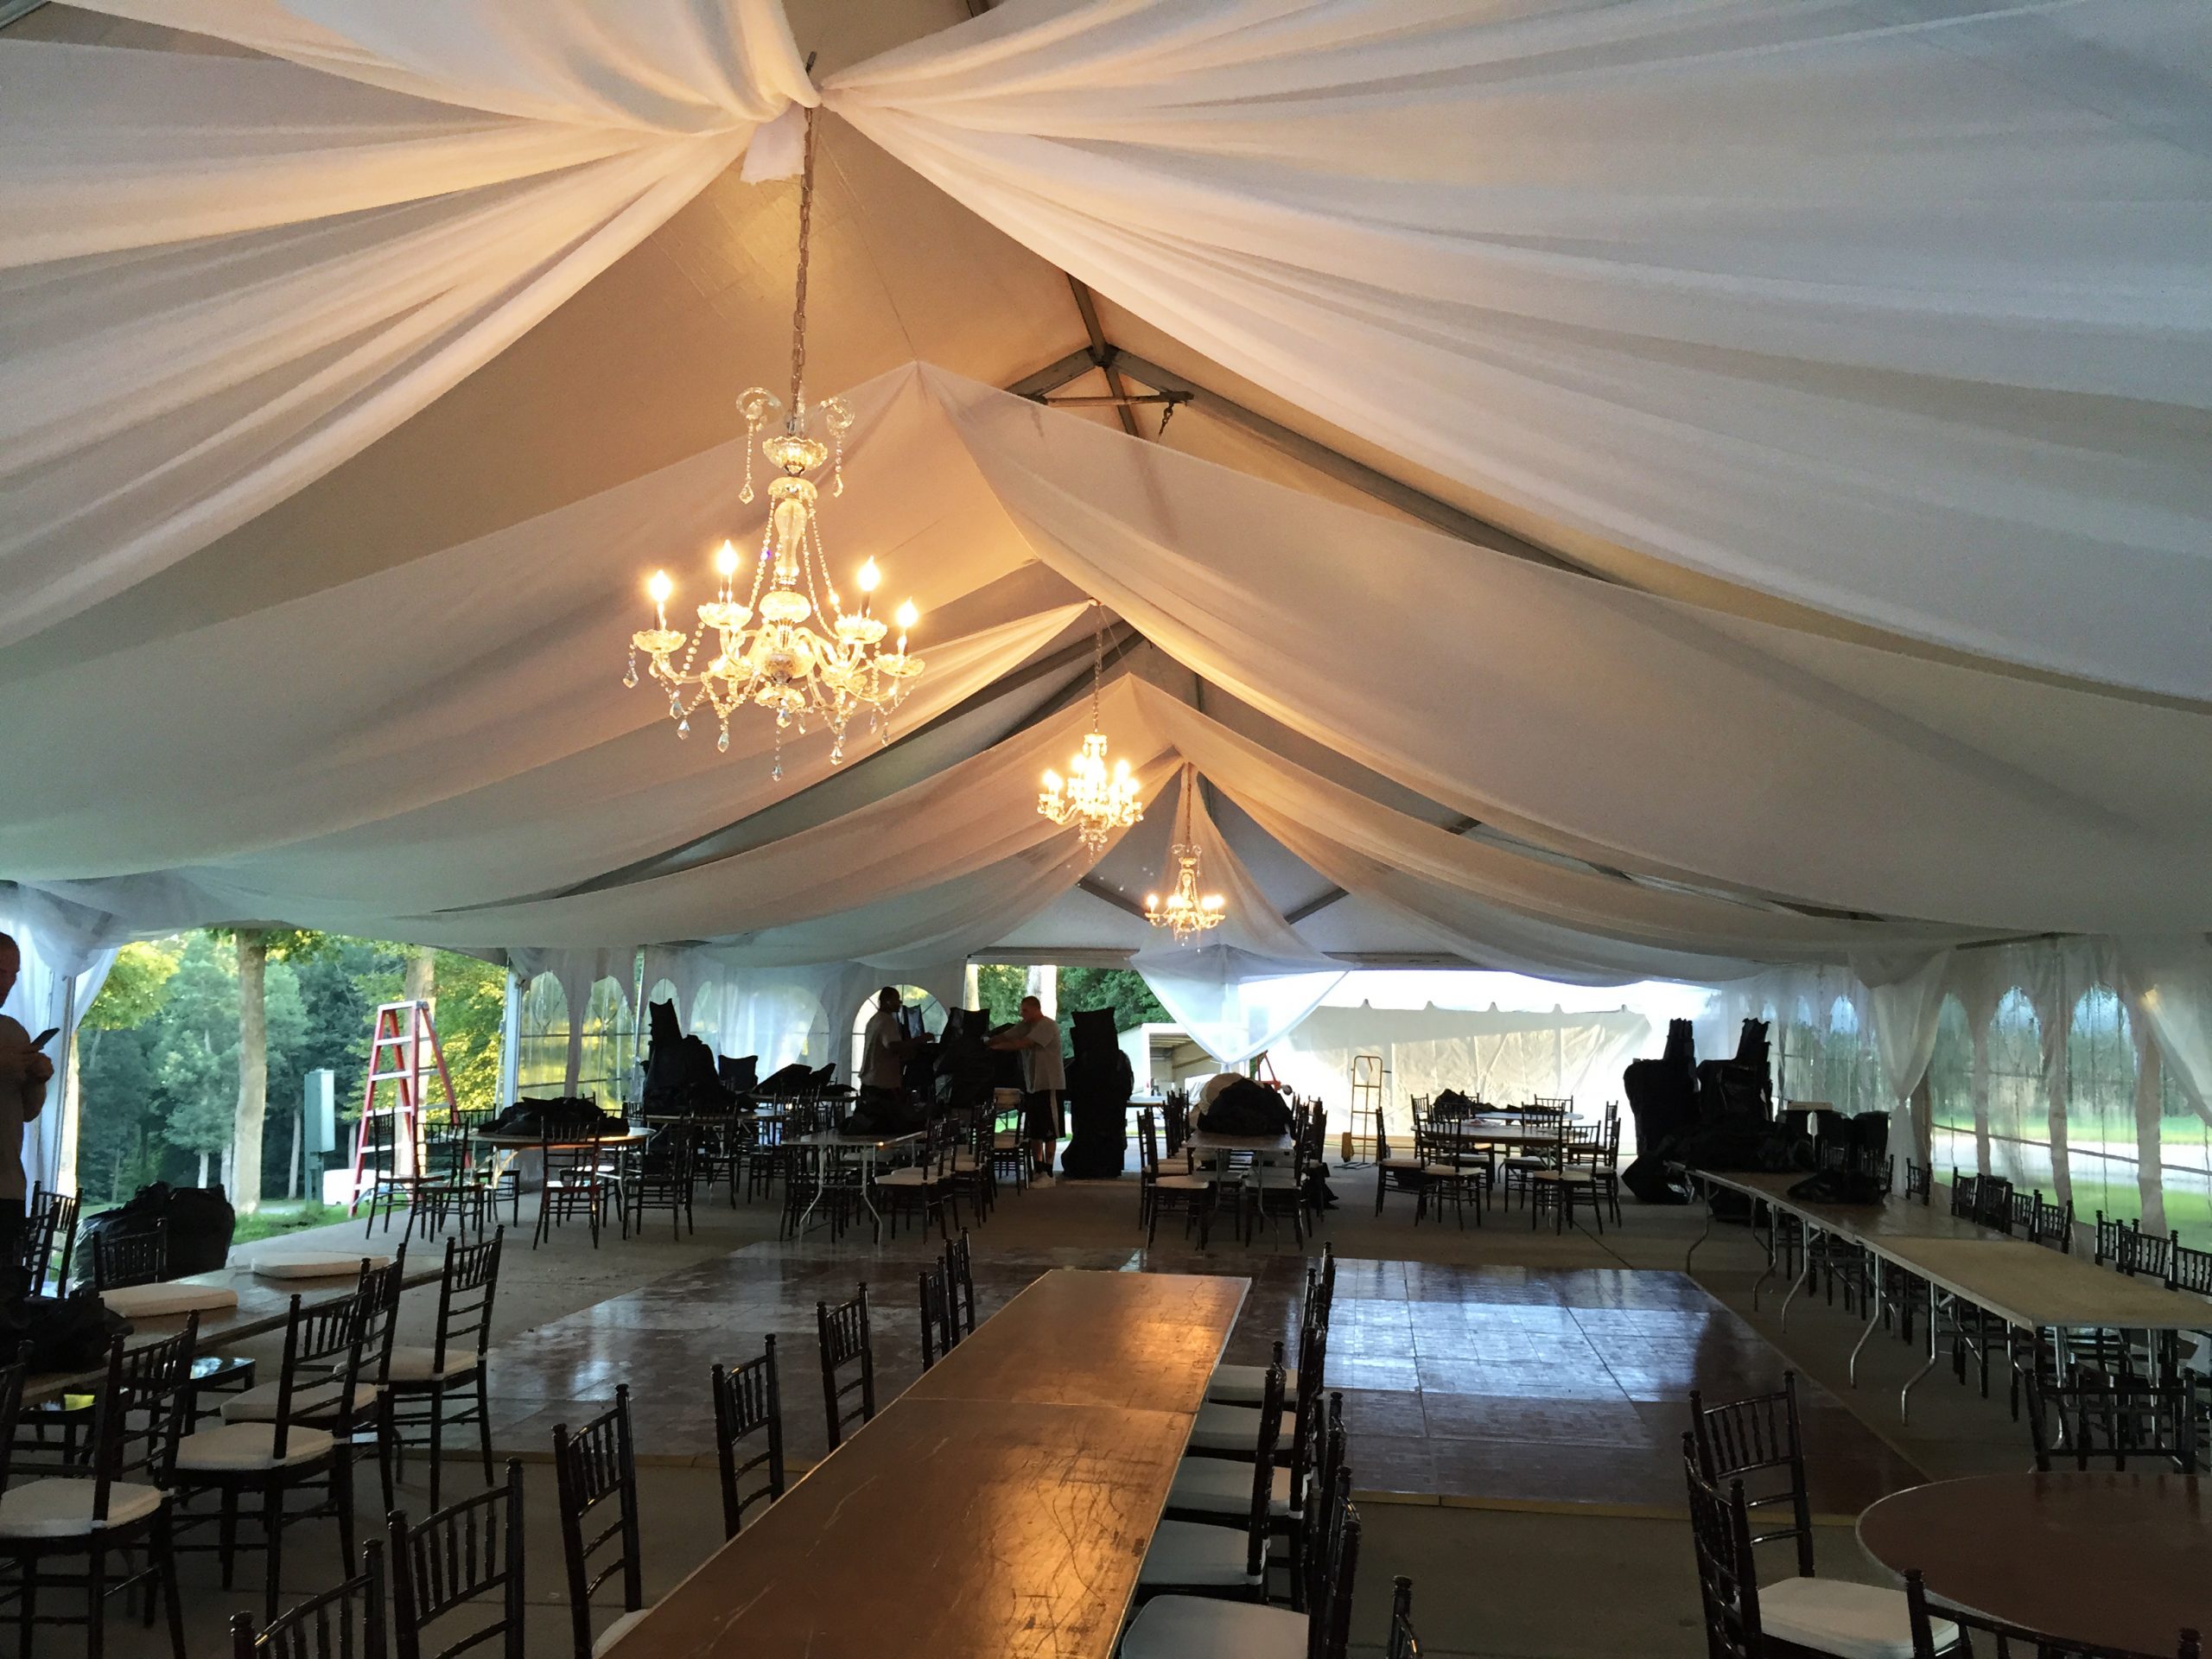 40′ x 80′ wedding tent with chandeliers and sheer drape install picture